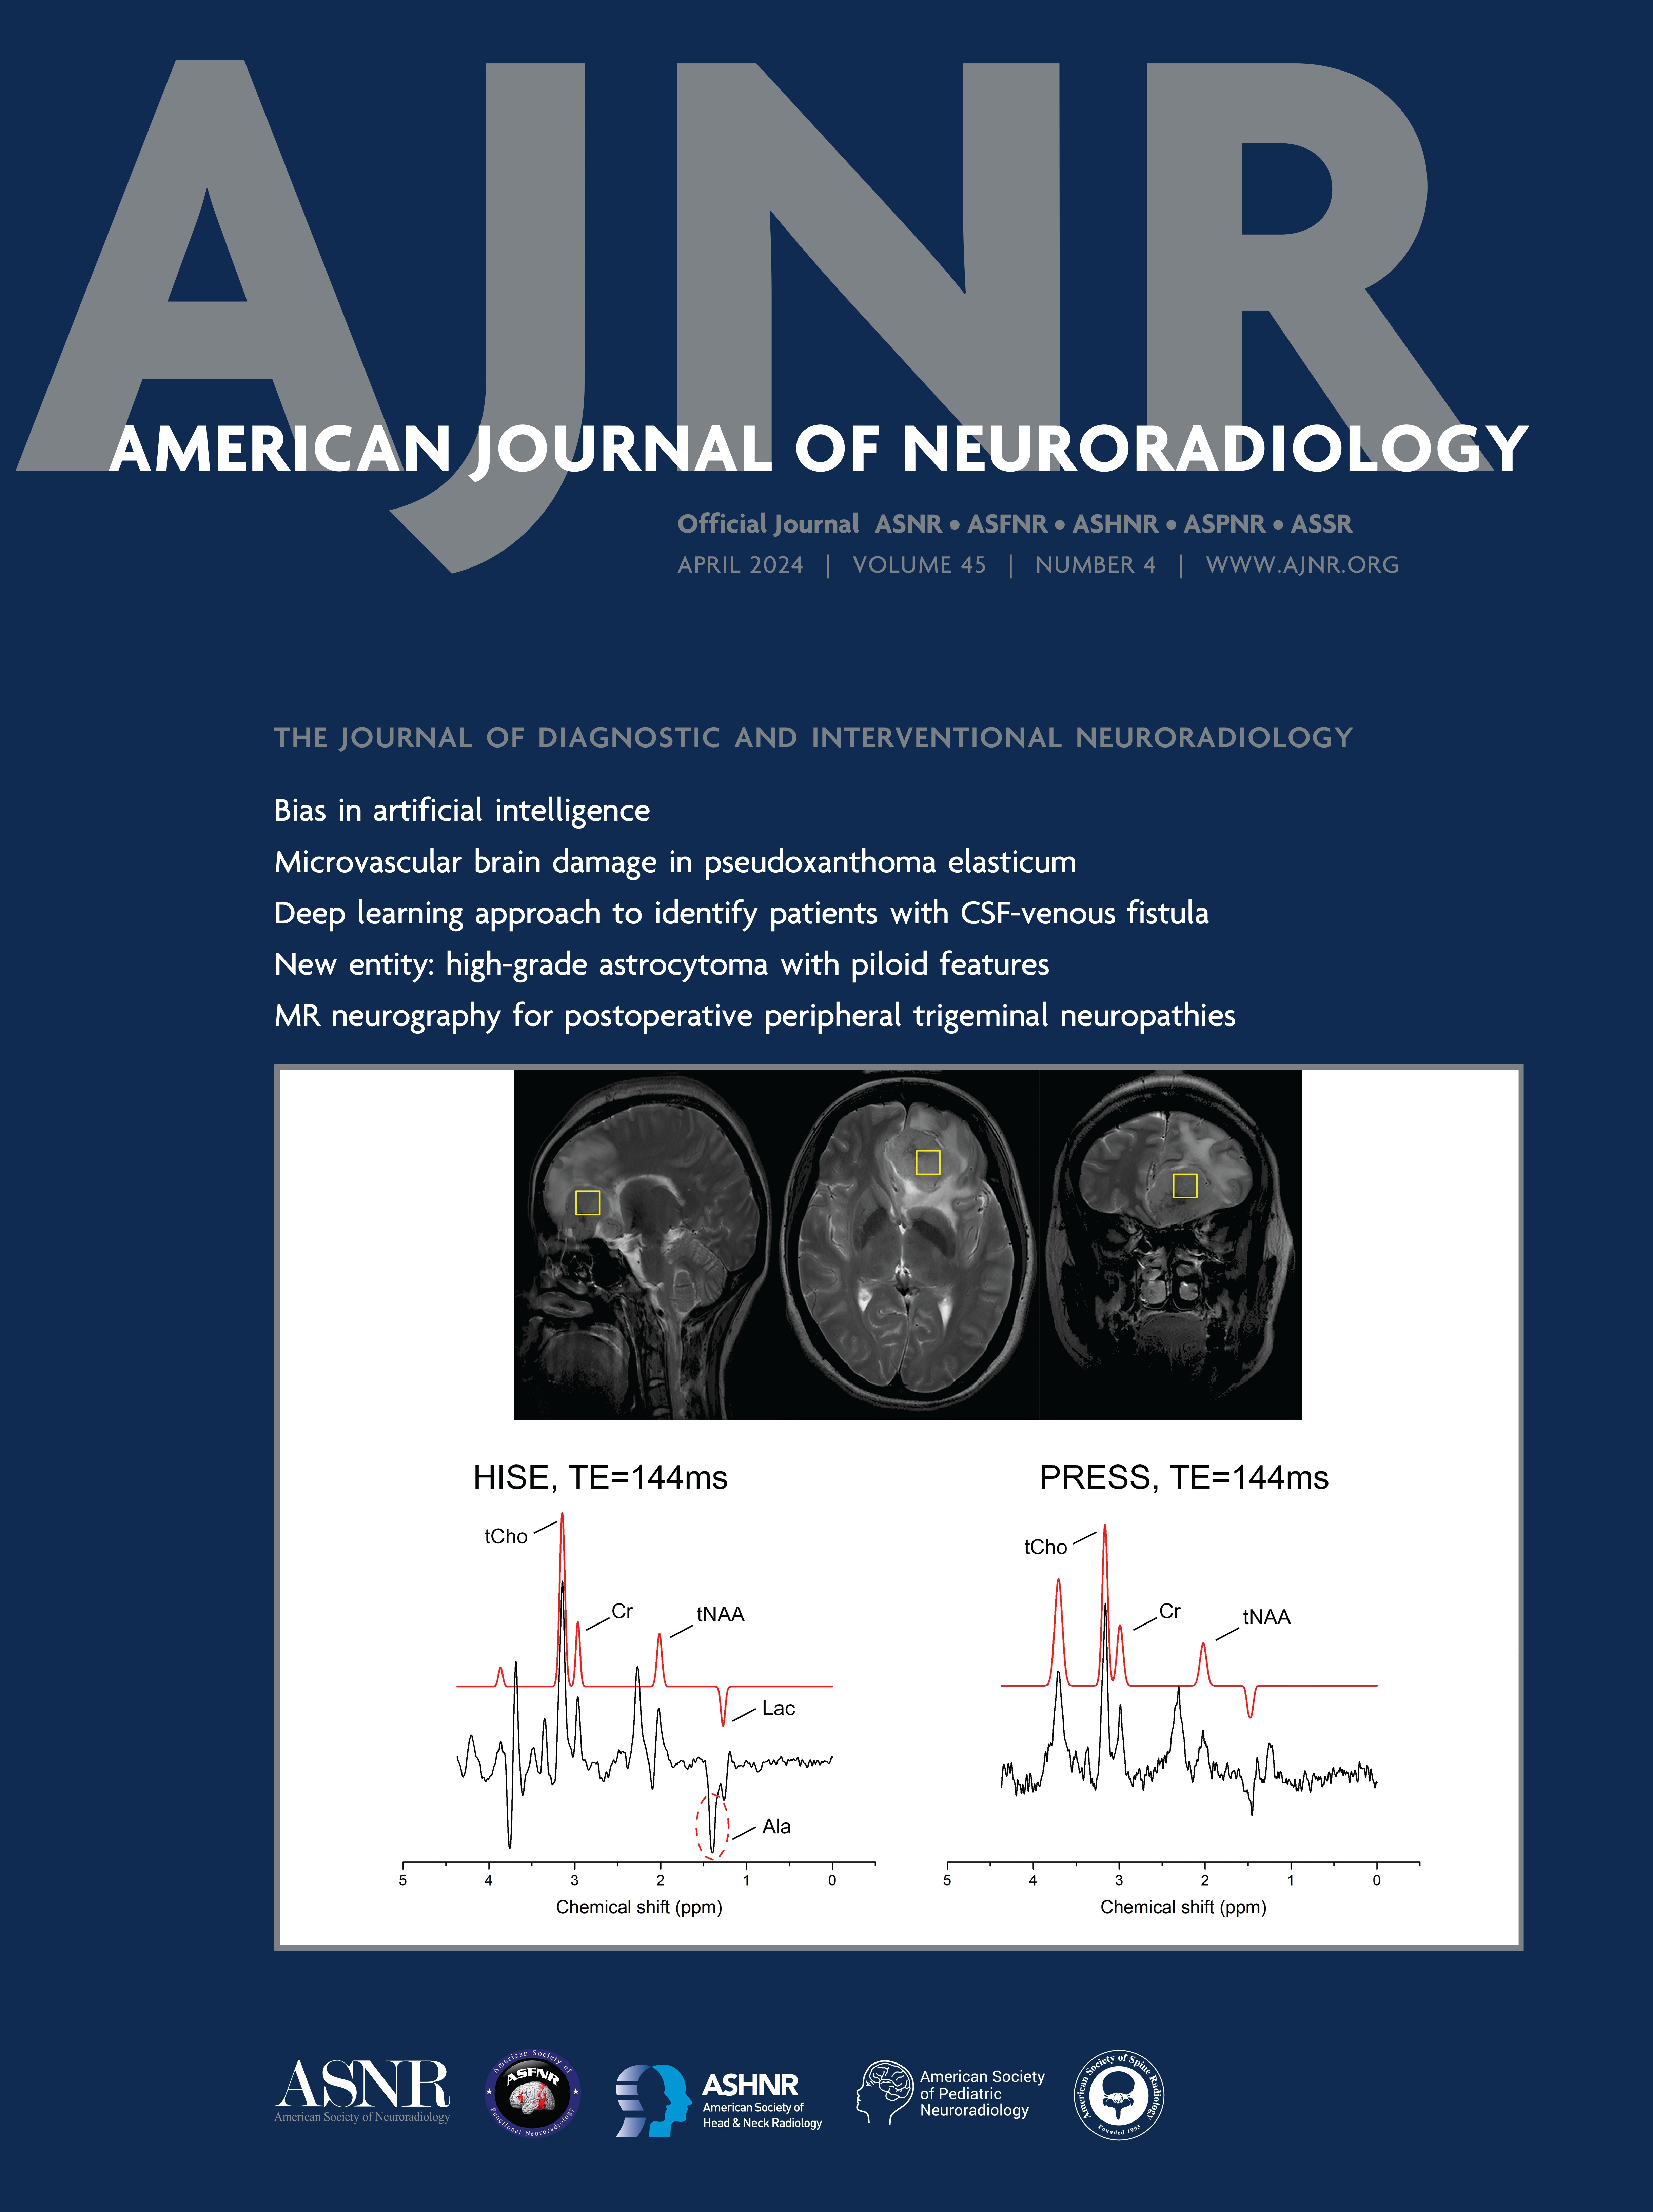 Clinical Evaluation of a 2-Minute Ultrafast Brain MR Protocol for Evaluation of Acute Pathology in the Emergency and Inpatient Settings [EMERGENCY NEURORADIOLOGY]